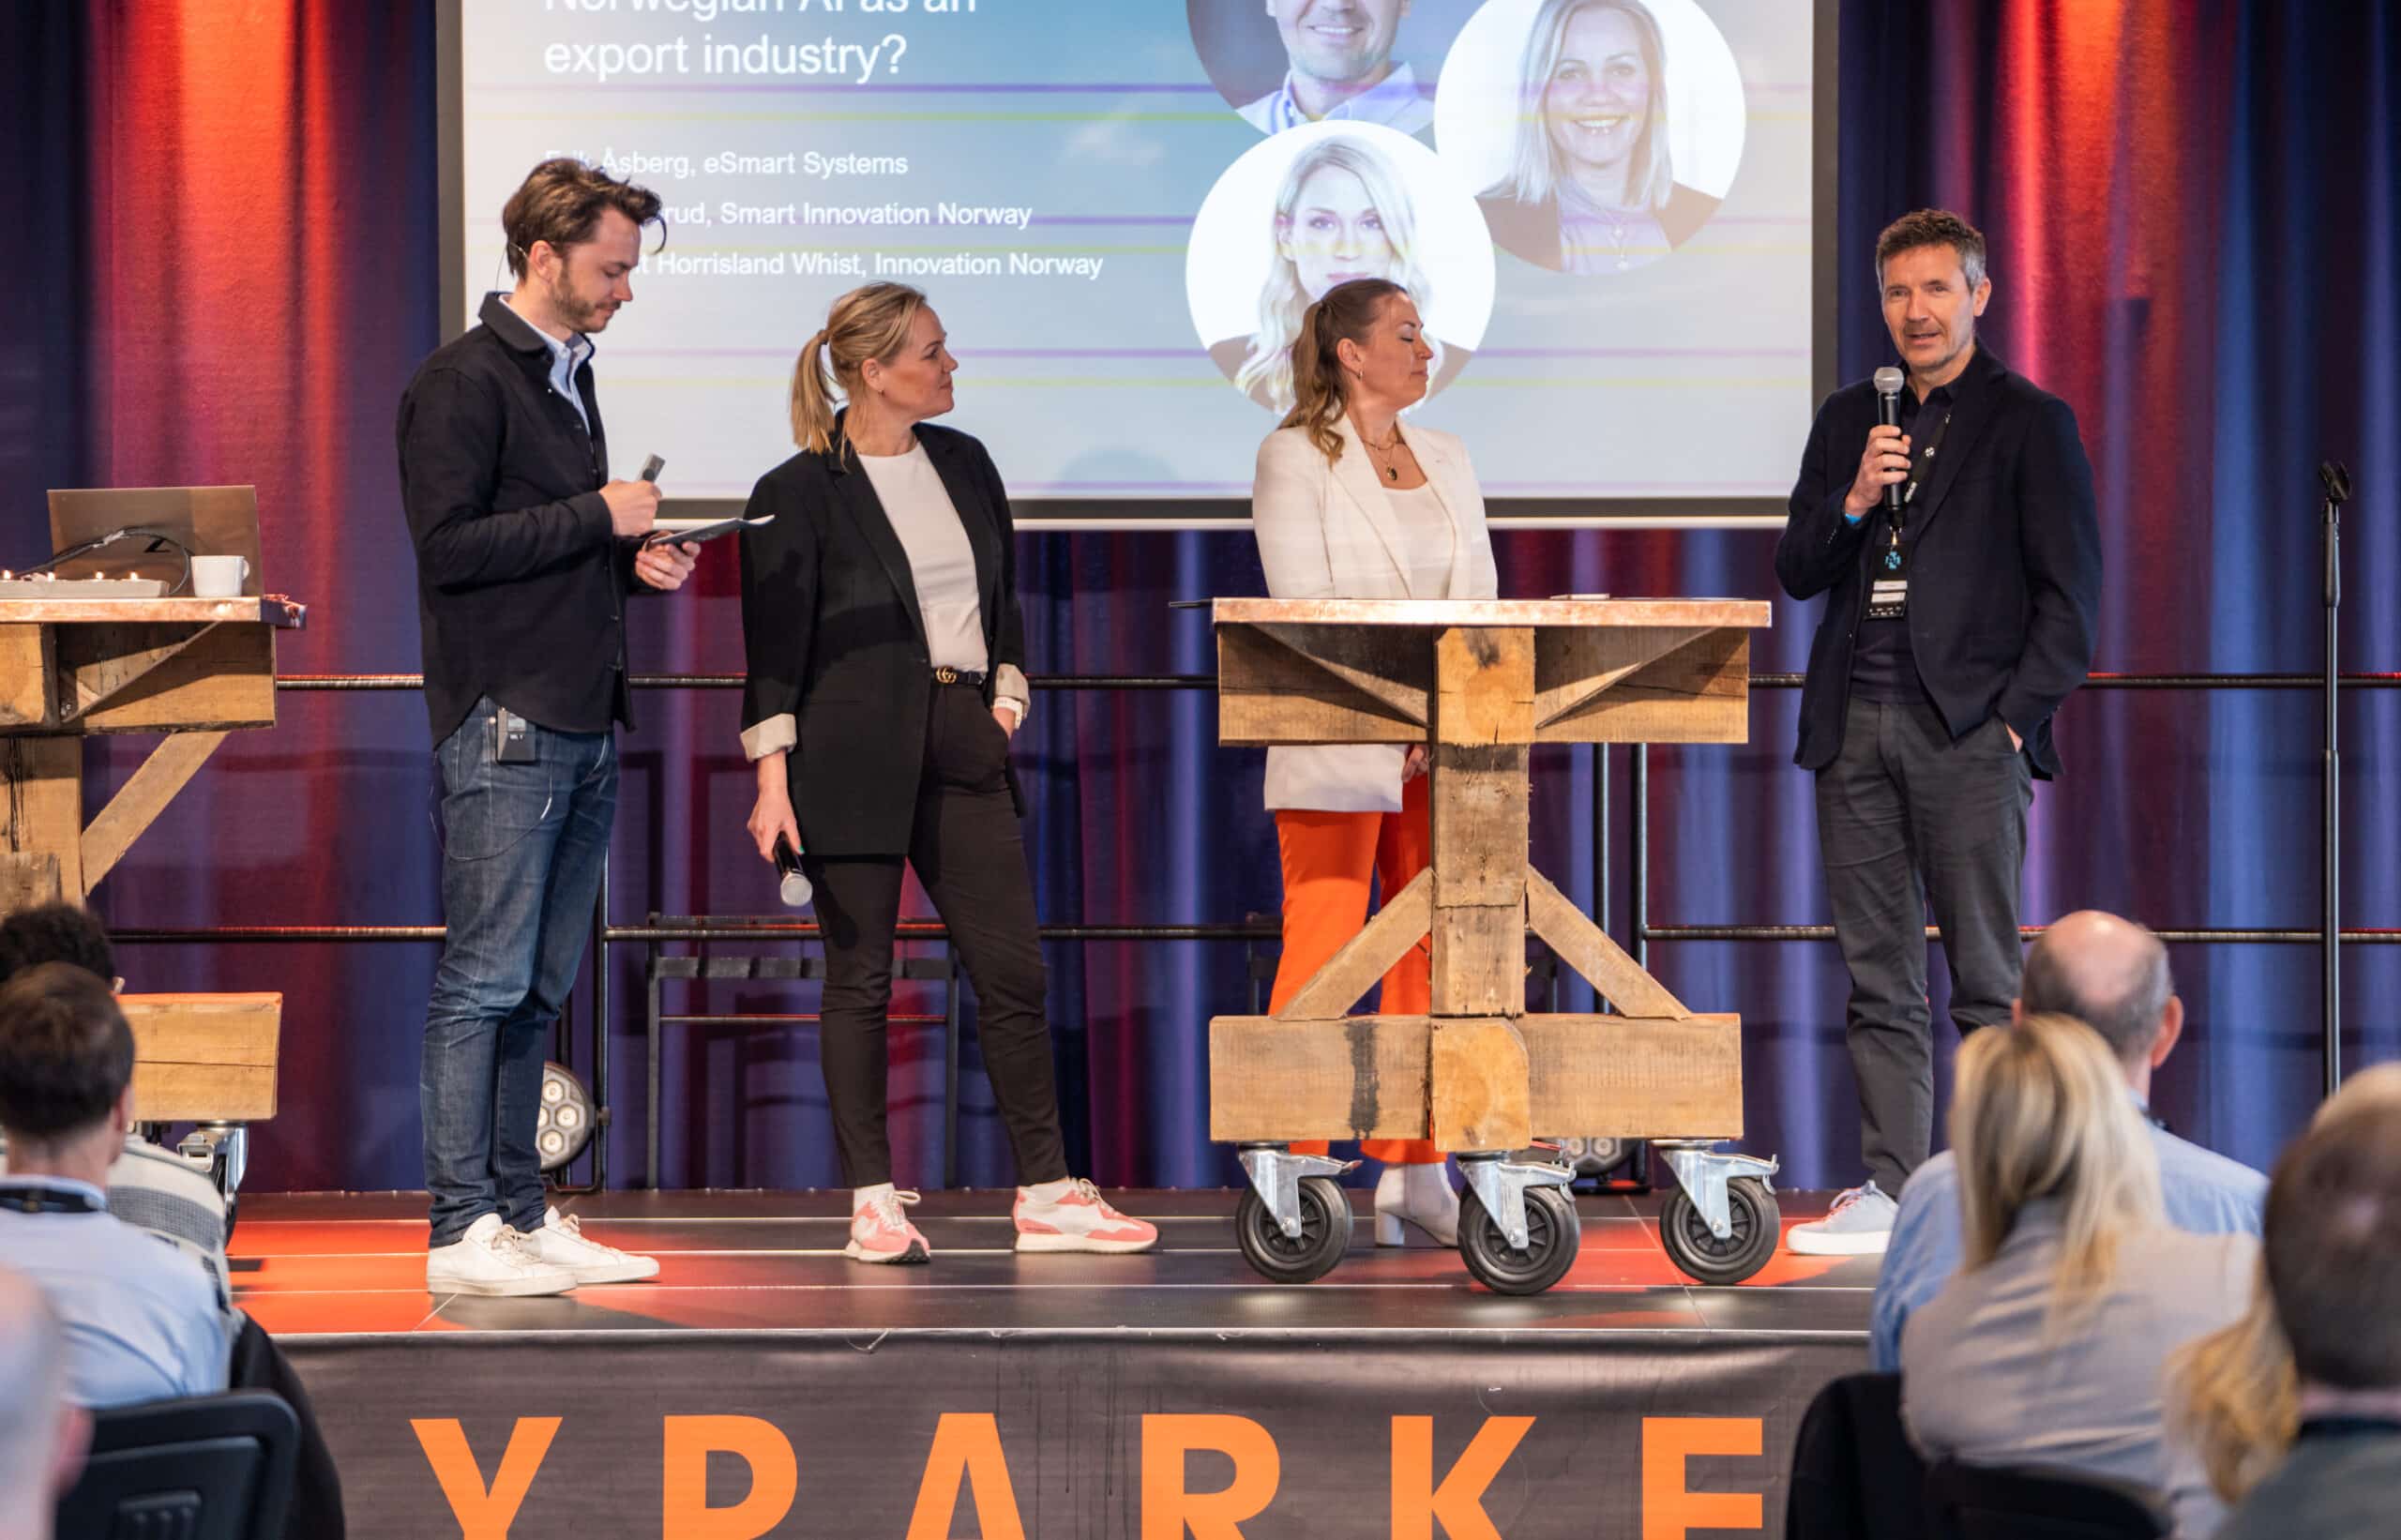 Jo Roald invited Eli Haugerud from Smart Innovation Norway, Silje Brit Horrisland Whist from Innovation Norway and Erik Åsberg from eSmart Systems to discuss Norwegian AI as an export industry. PHOTO: Stein Johnsen, ContentVideo